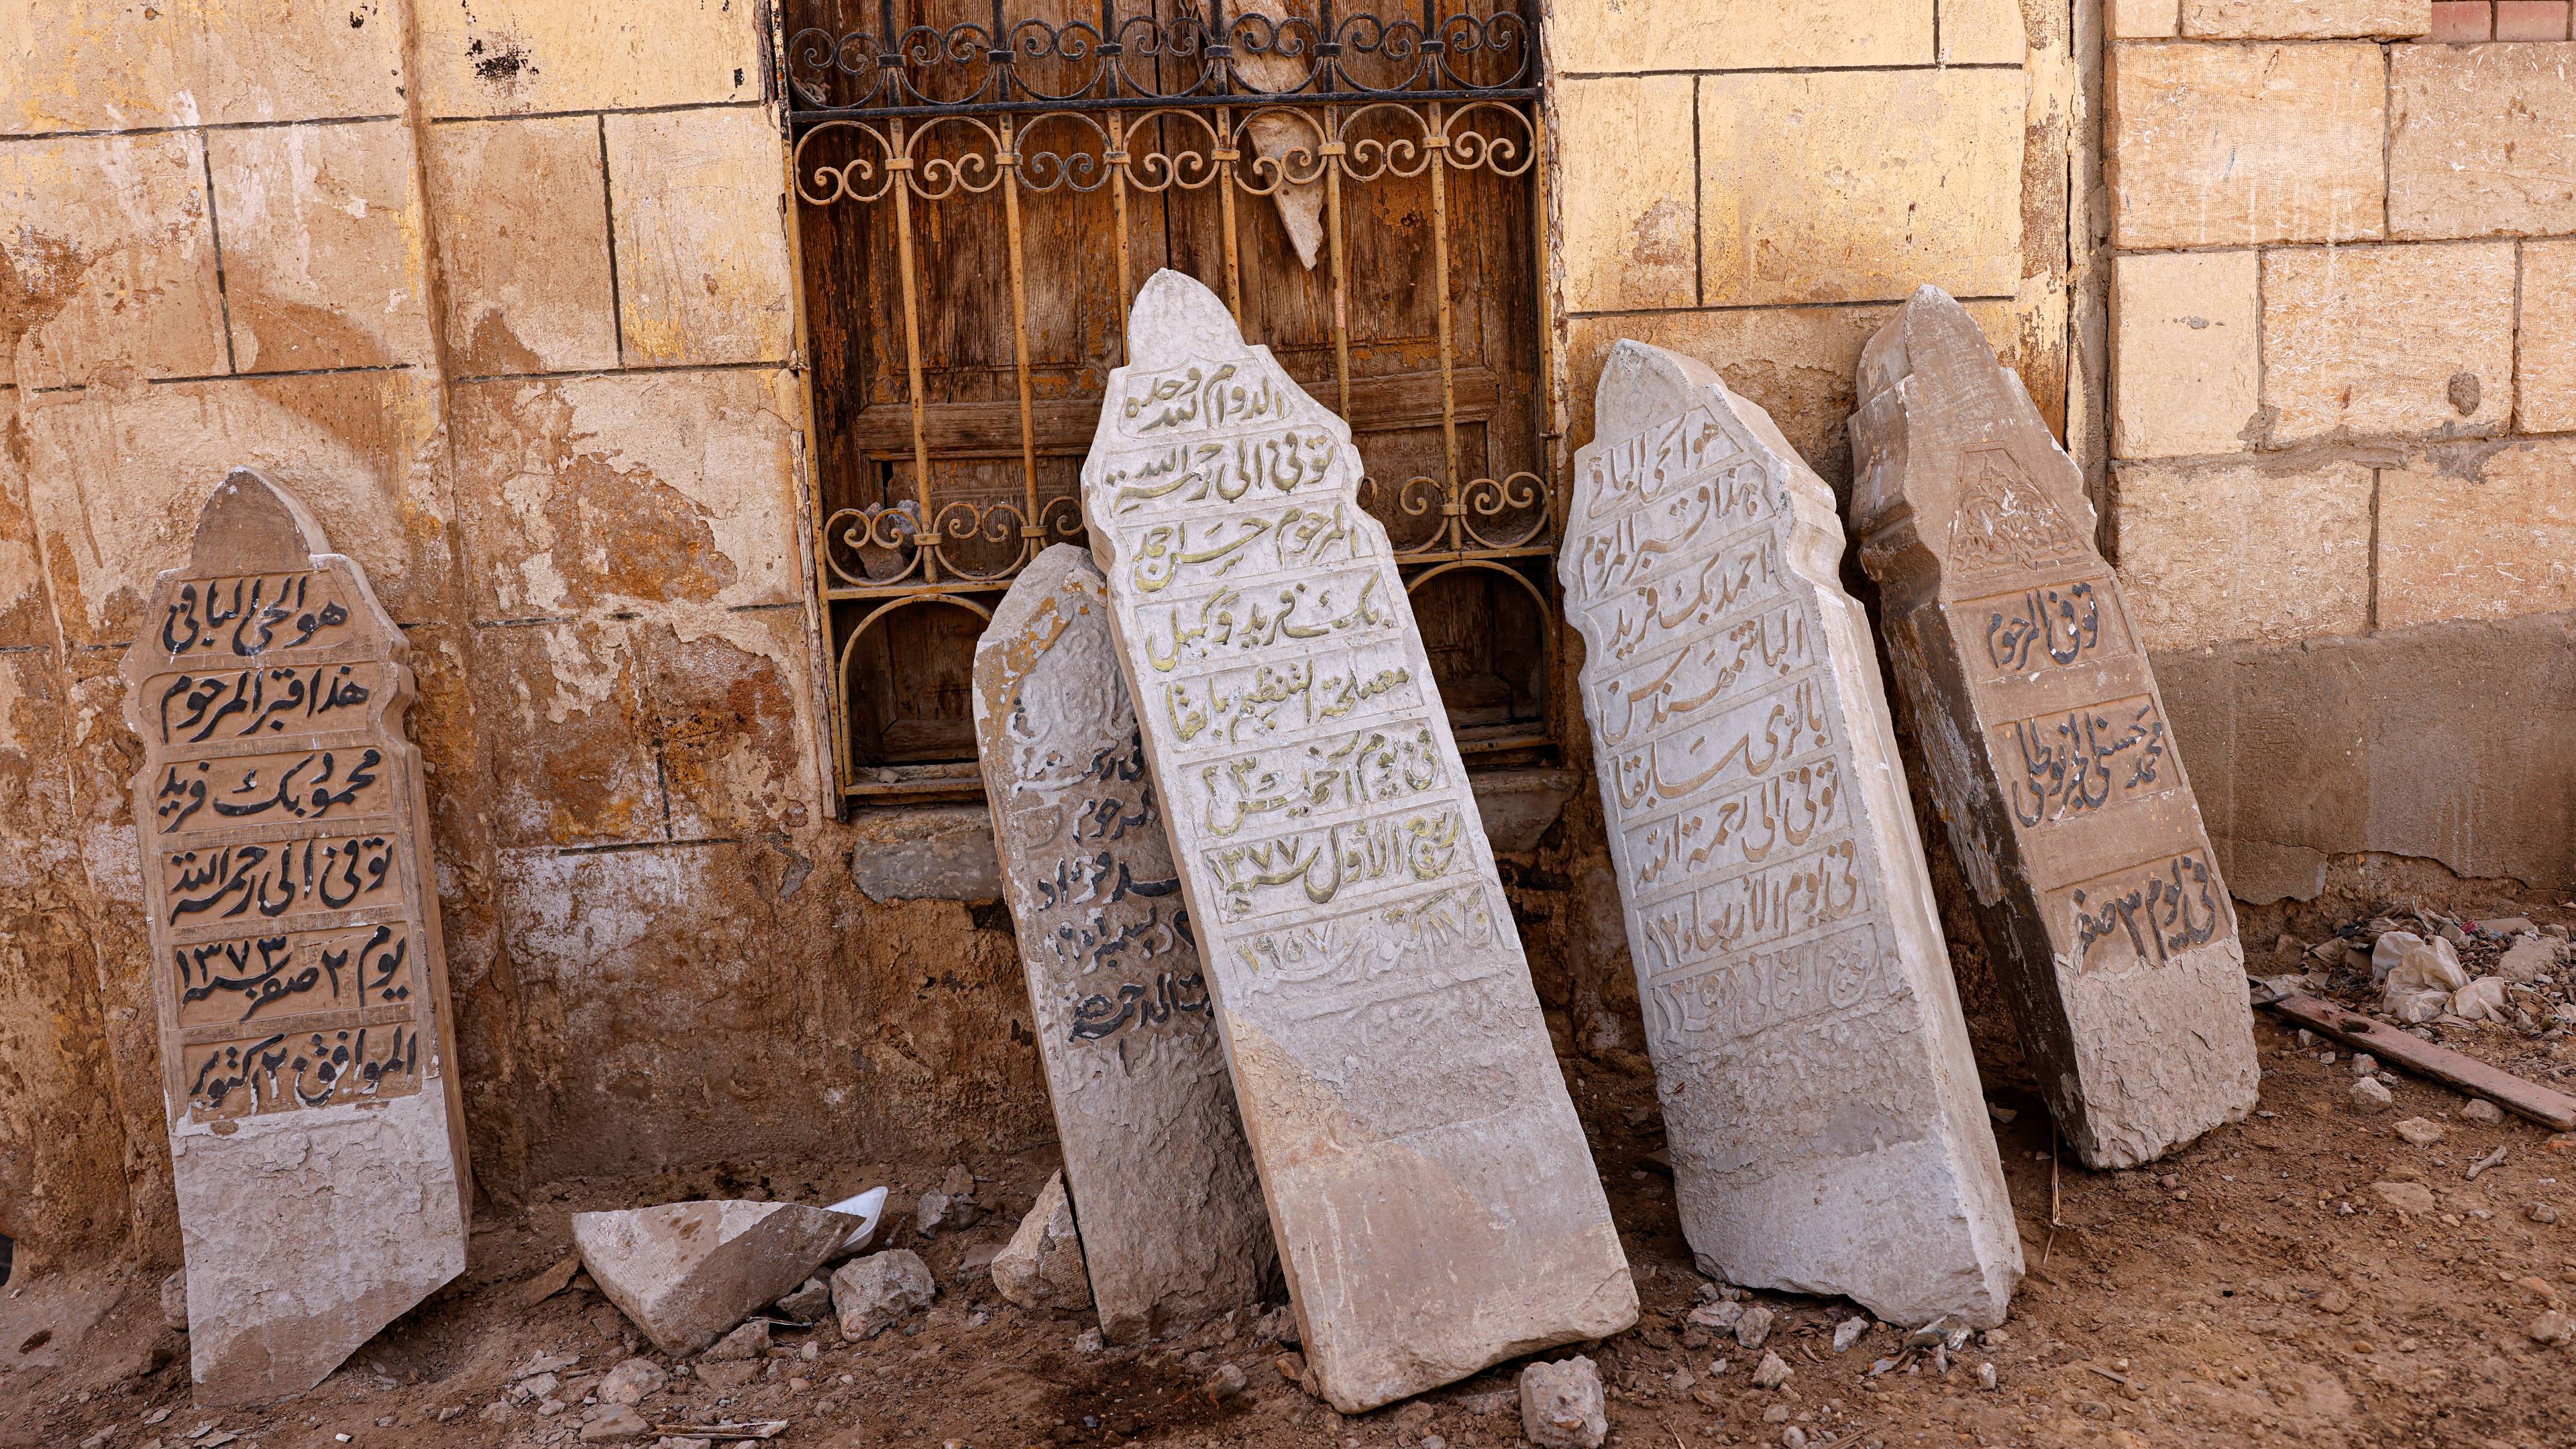 Graves carved with Arabic calligraphy lay on the side of a brick building.